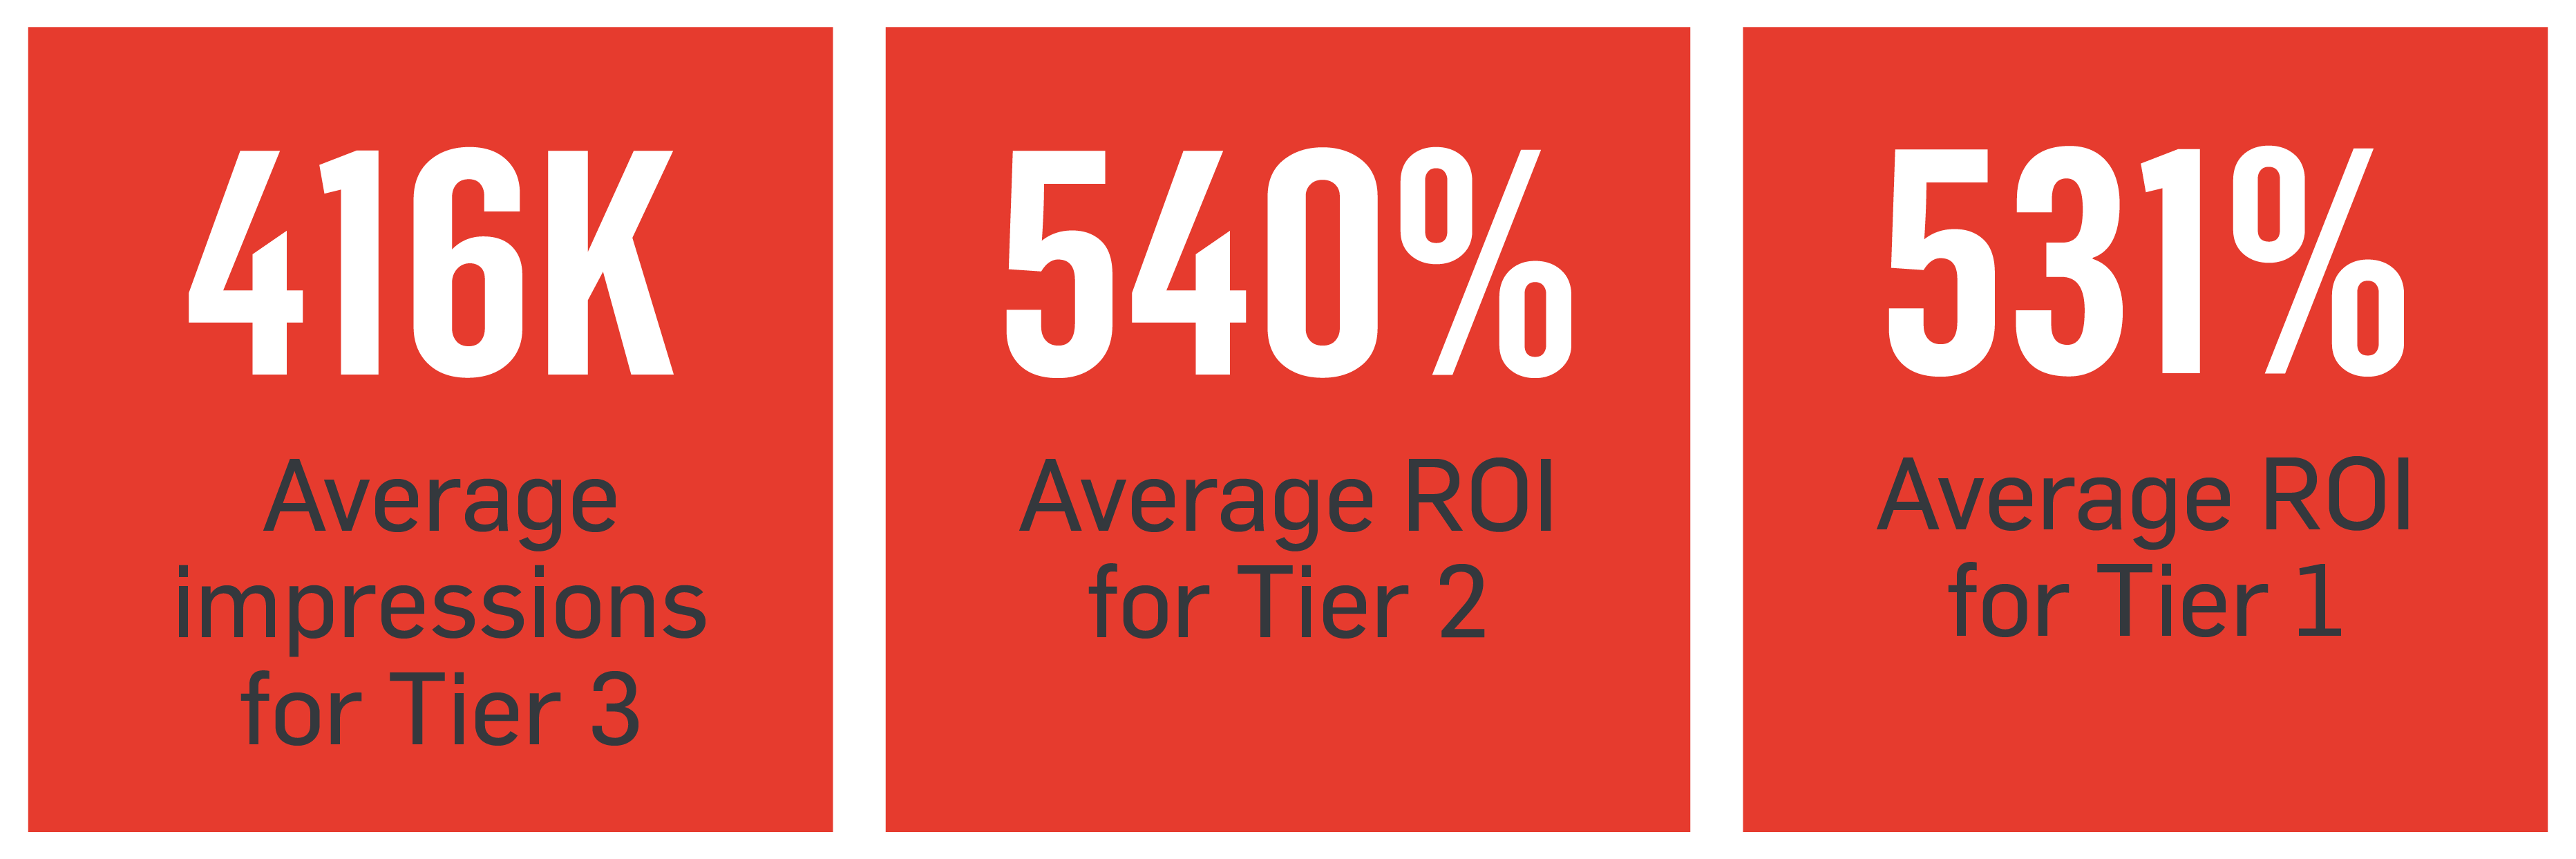 Stats at a glance, based on the current season's campaign performance: Average impressions for Tier 3: 416K Average ROI for Tier 2: 540% Average ROI for Tier 1: 531%.